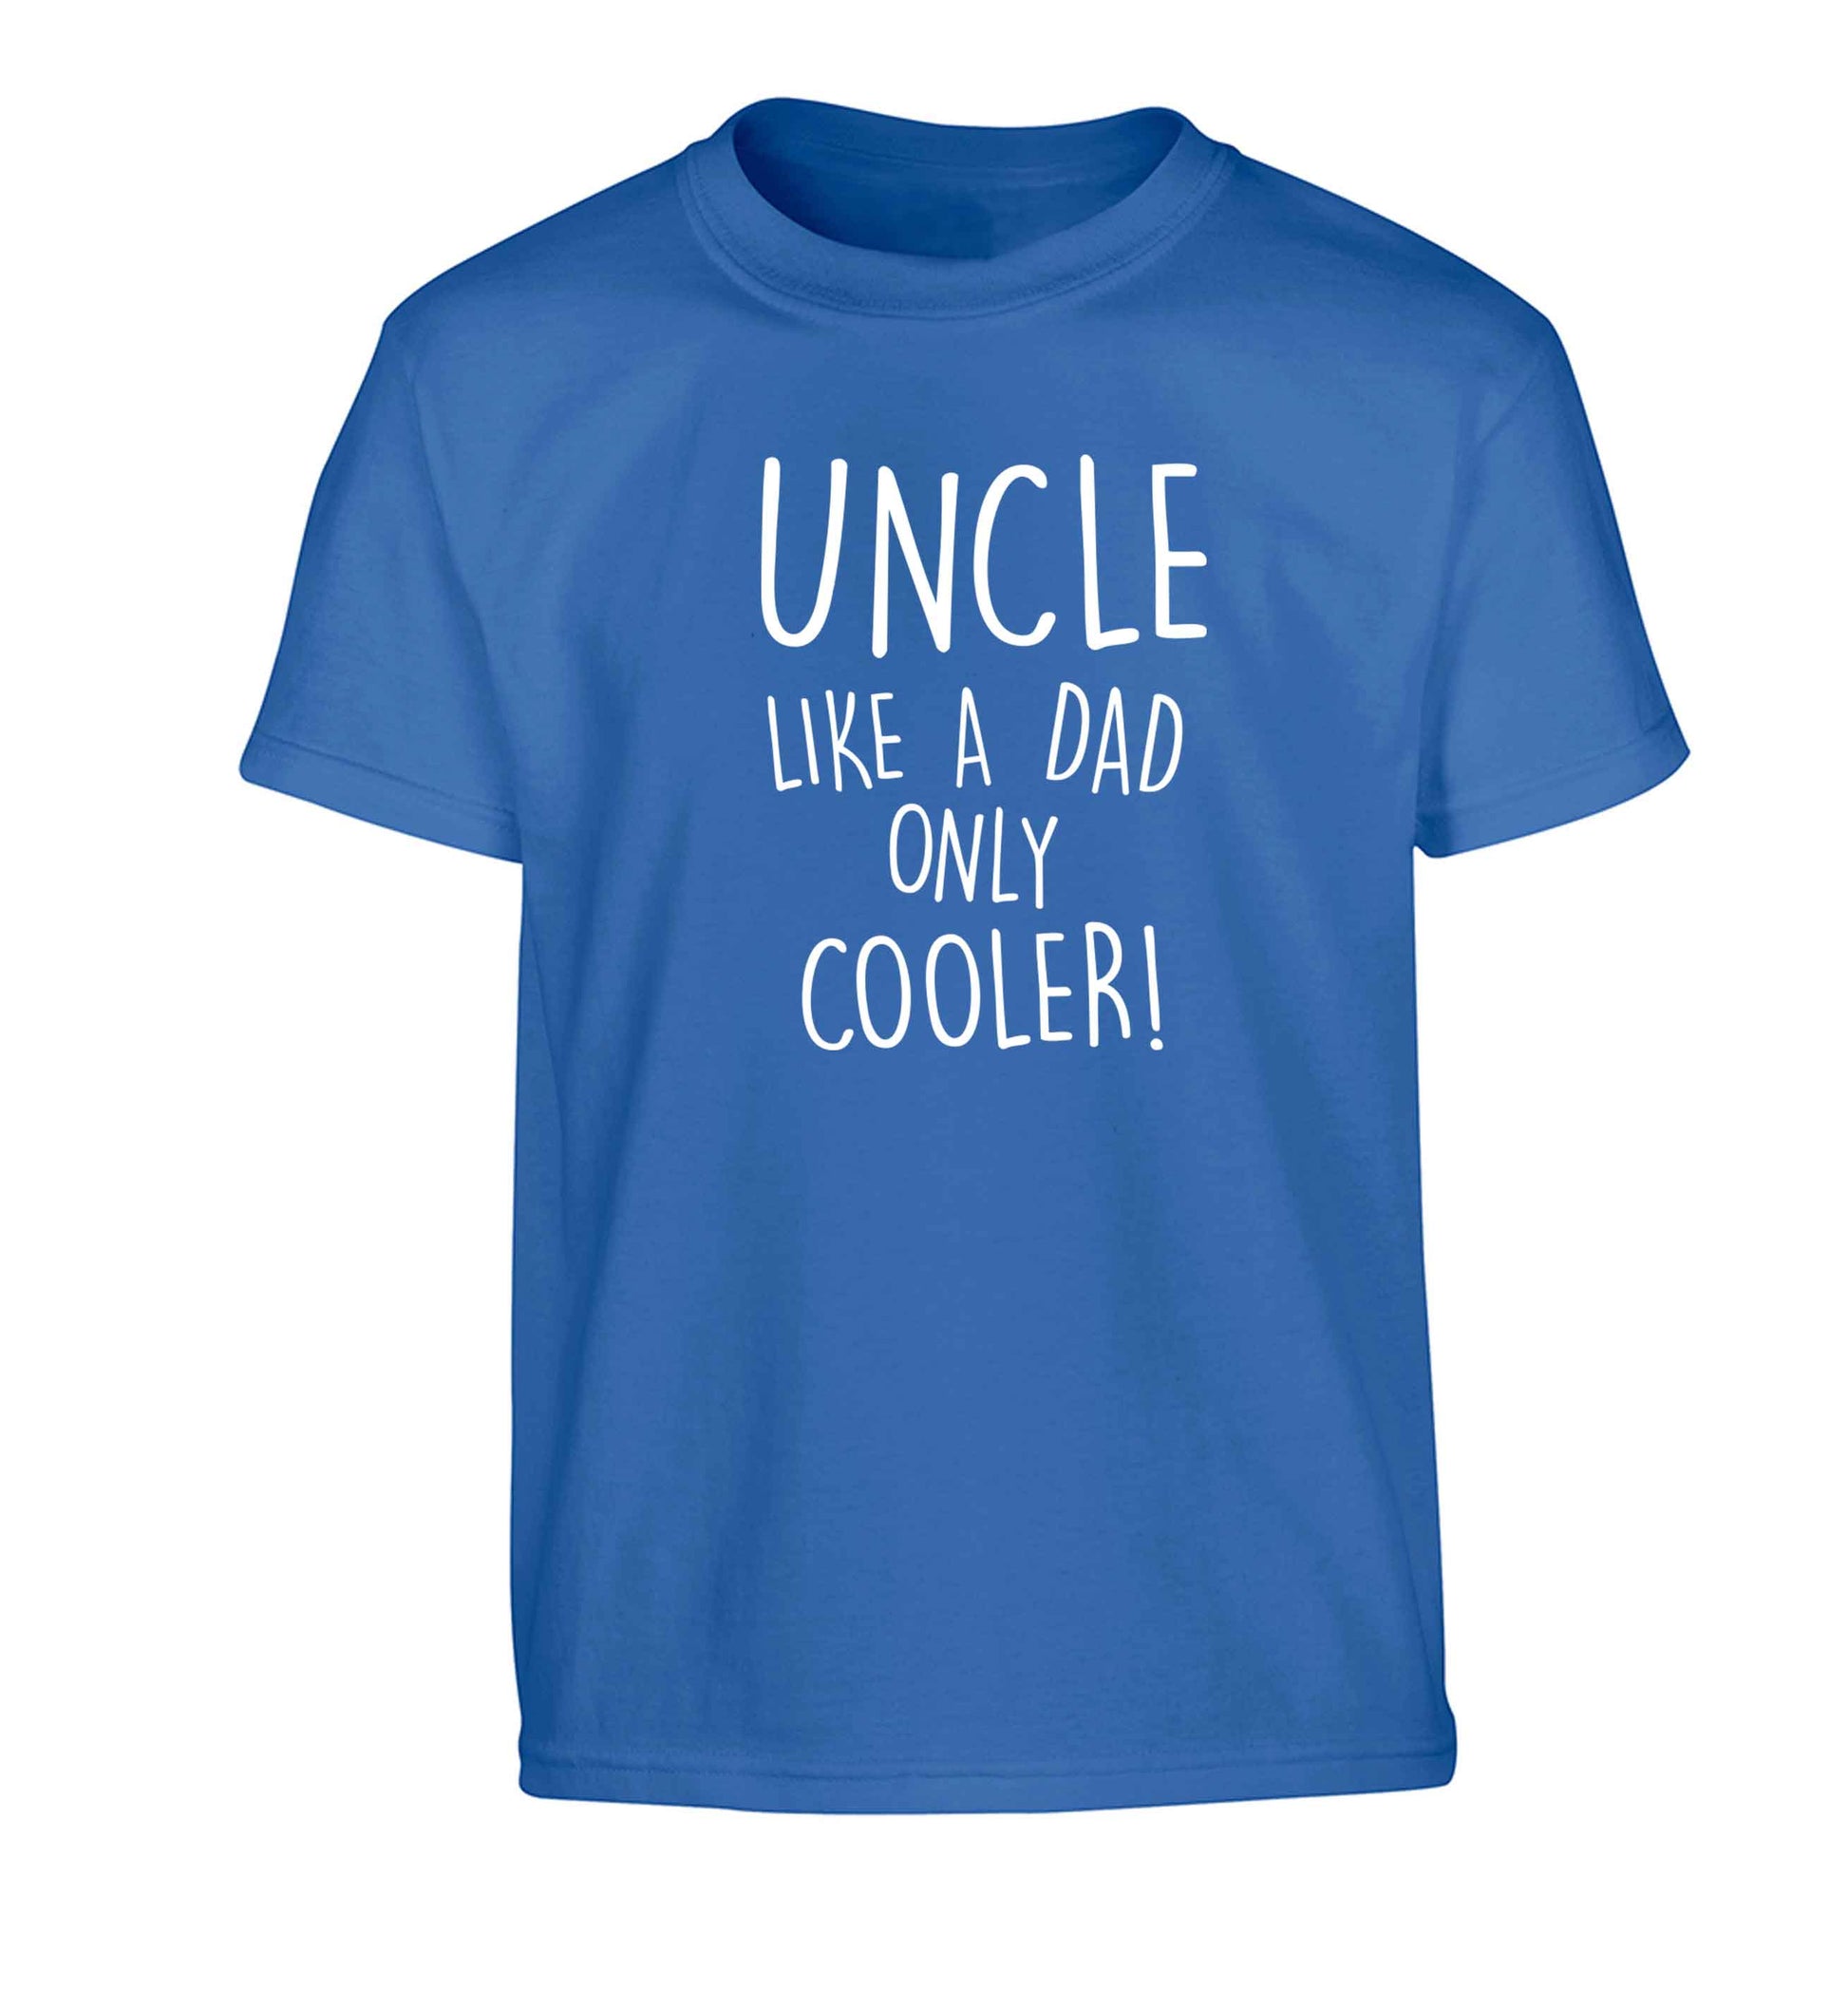 Uncle like a dad only cooler Children's blue Tshirt 12-13 Years